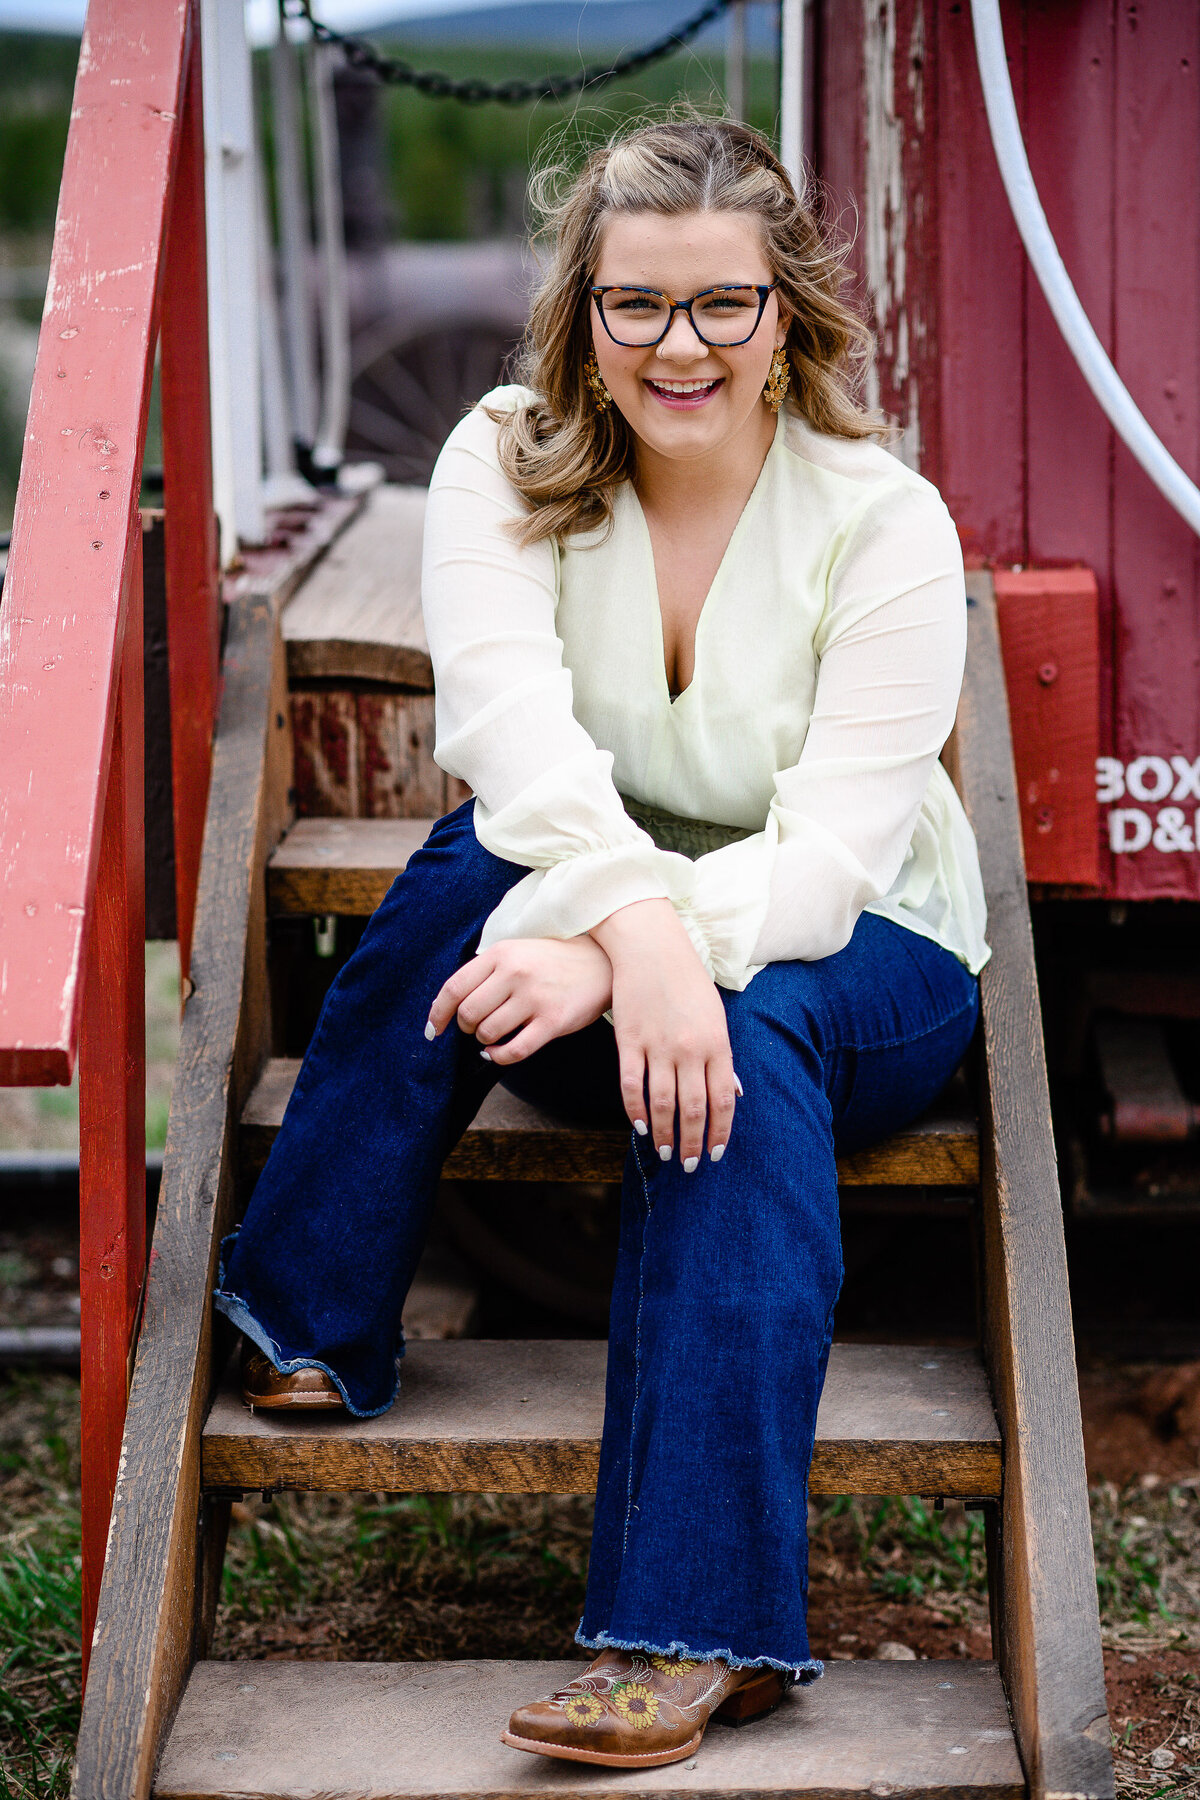 high school senior sitting on stairs of a train while wearing a cream blouse and jeans for her senior photo outfits ideas captured by denver senior photographer